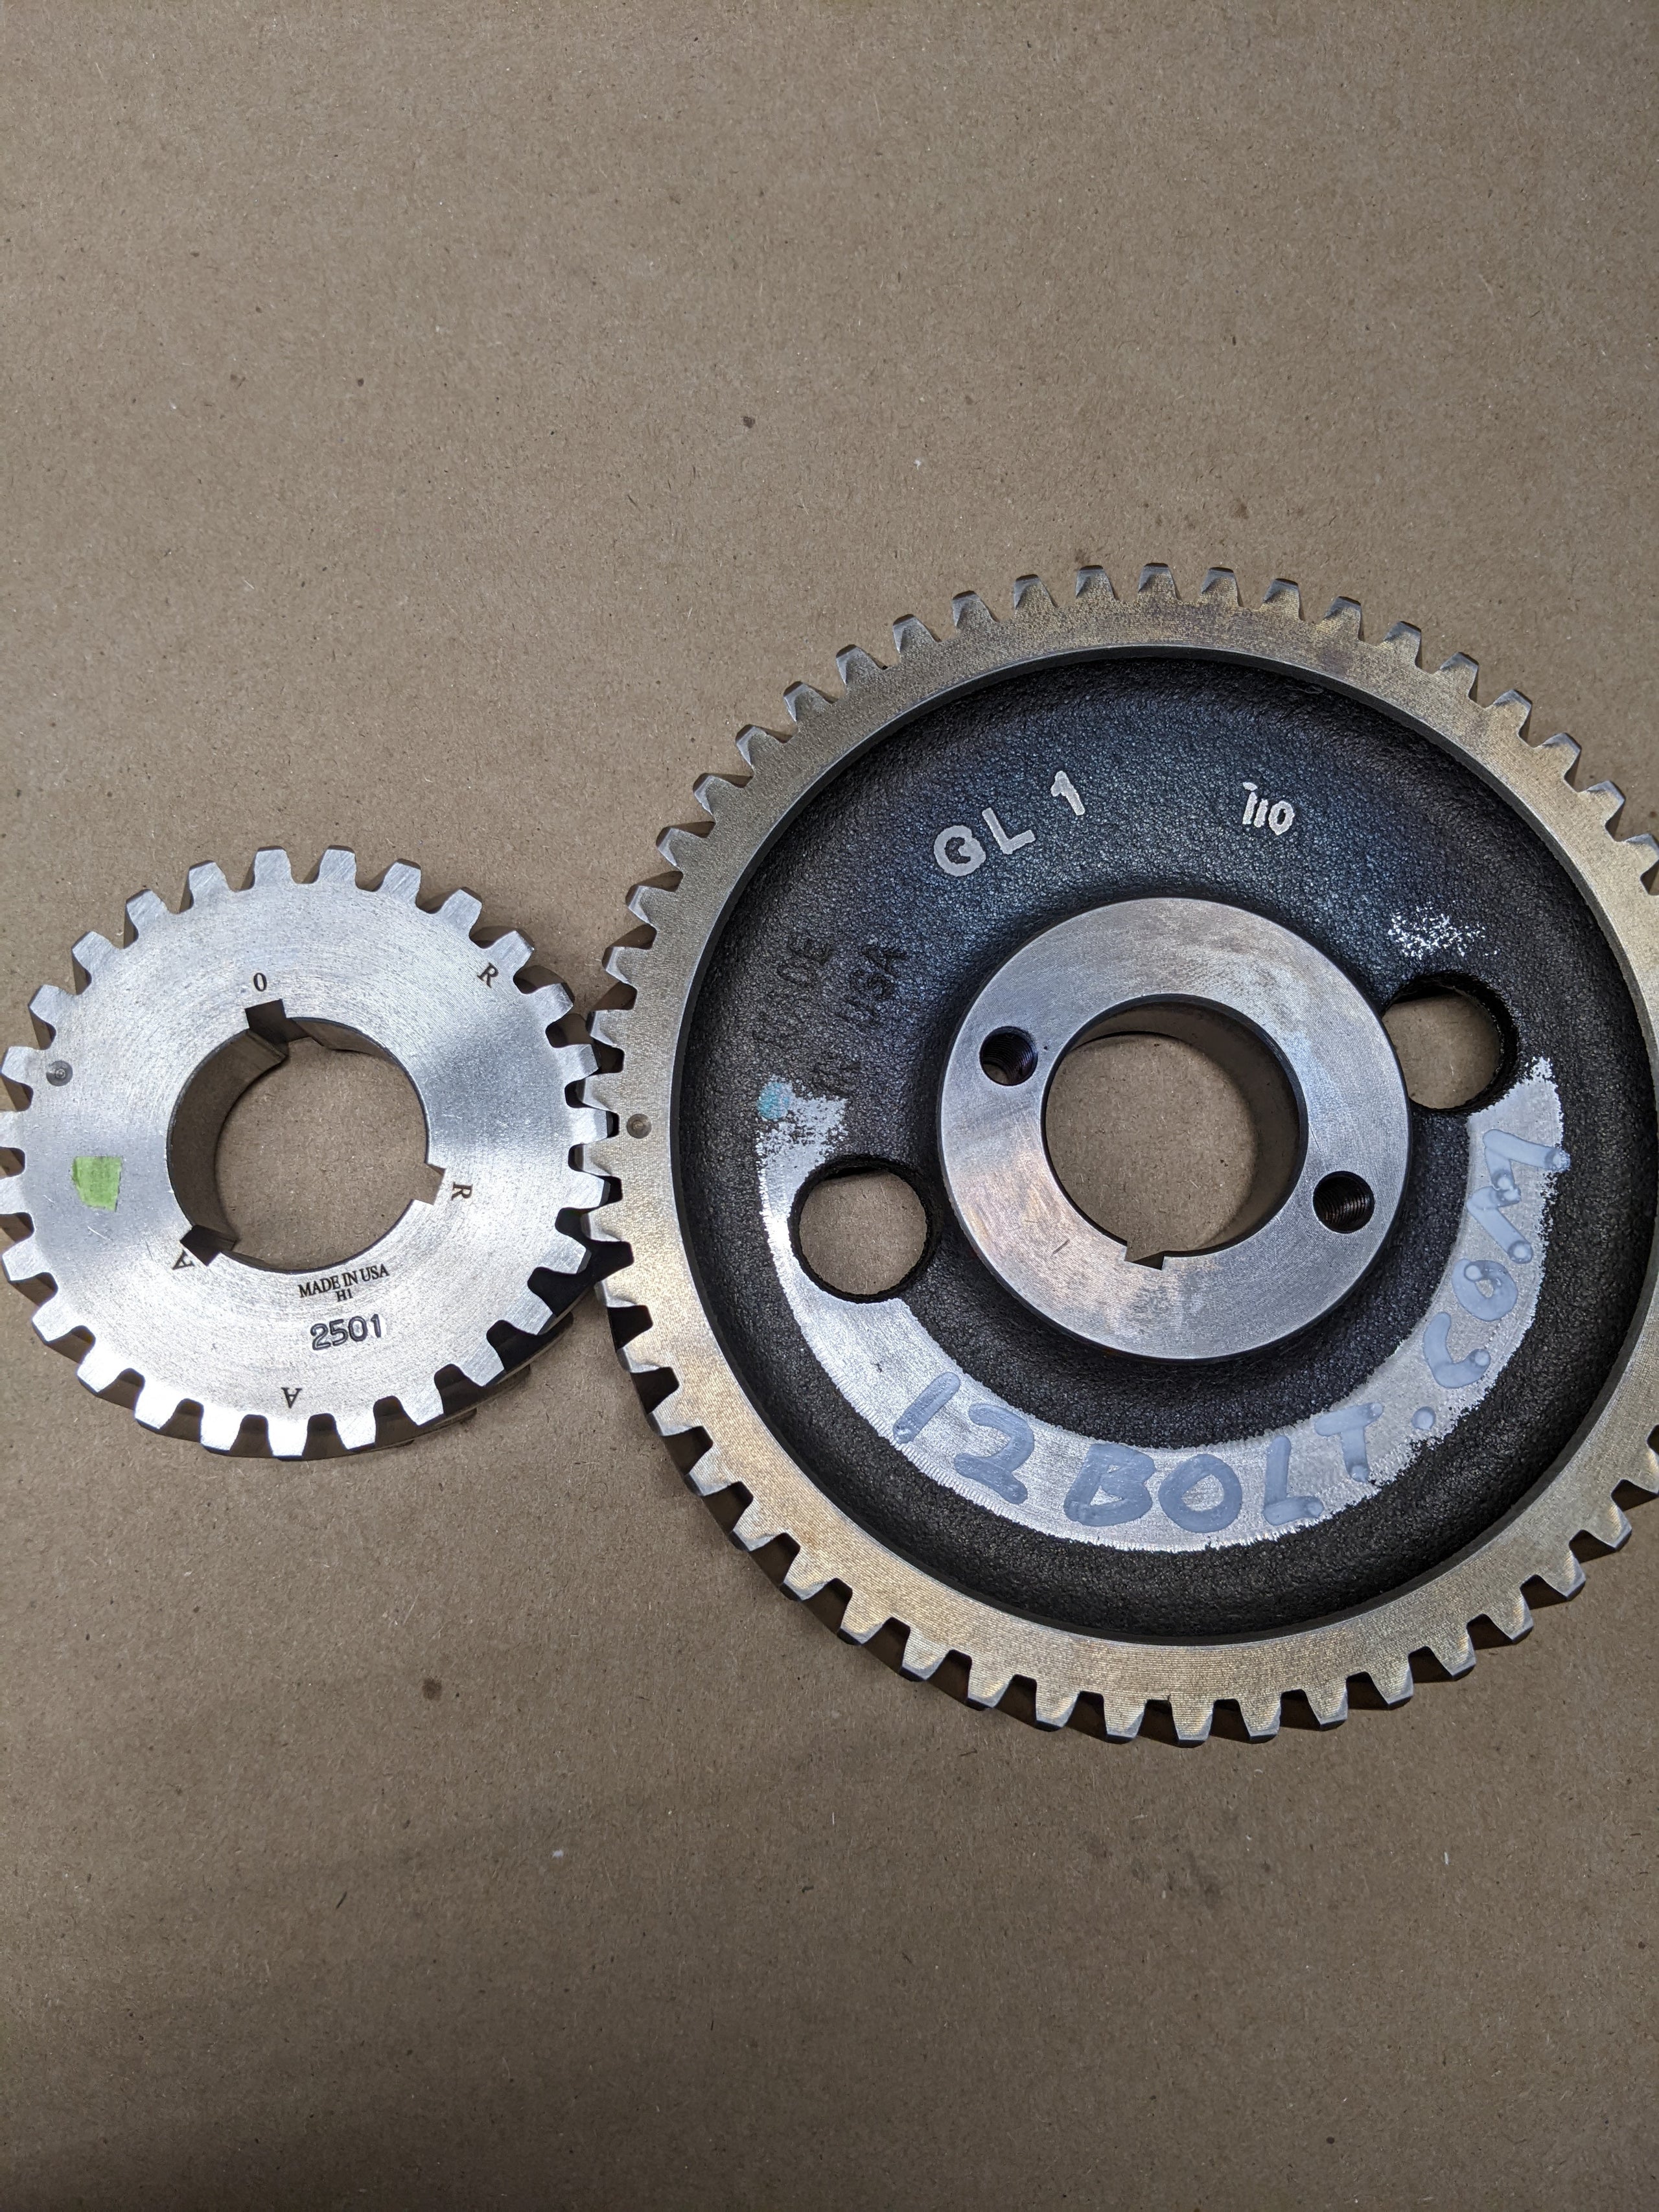 How Long Do the Timing Gears Last?